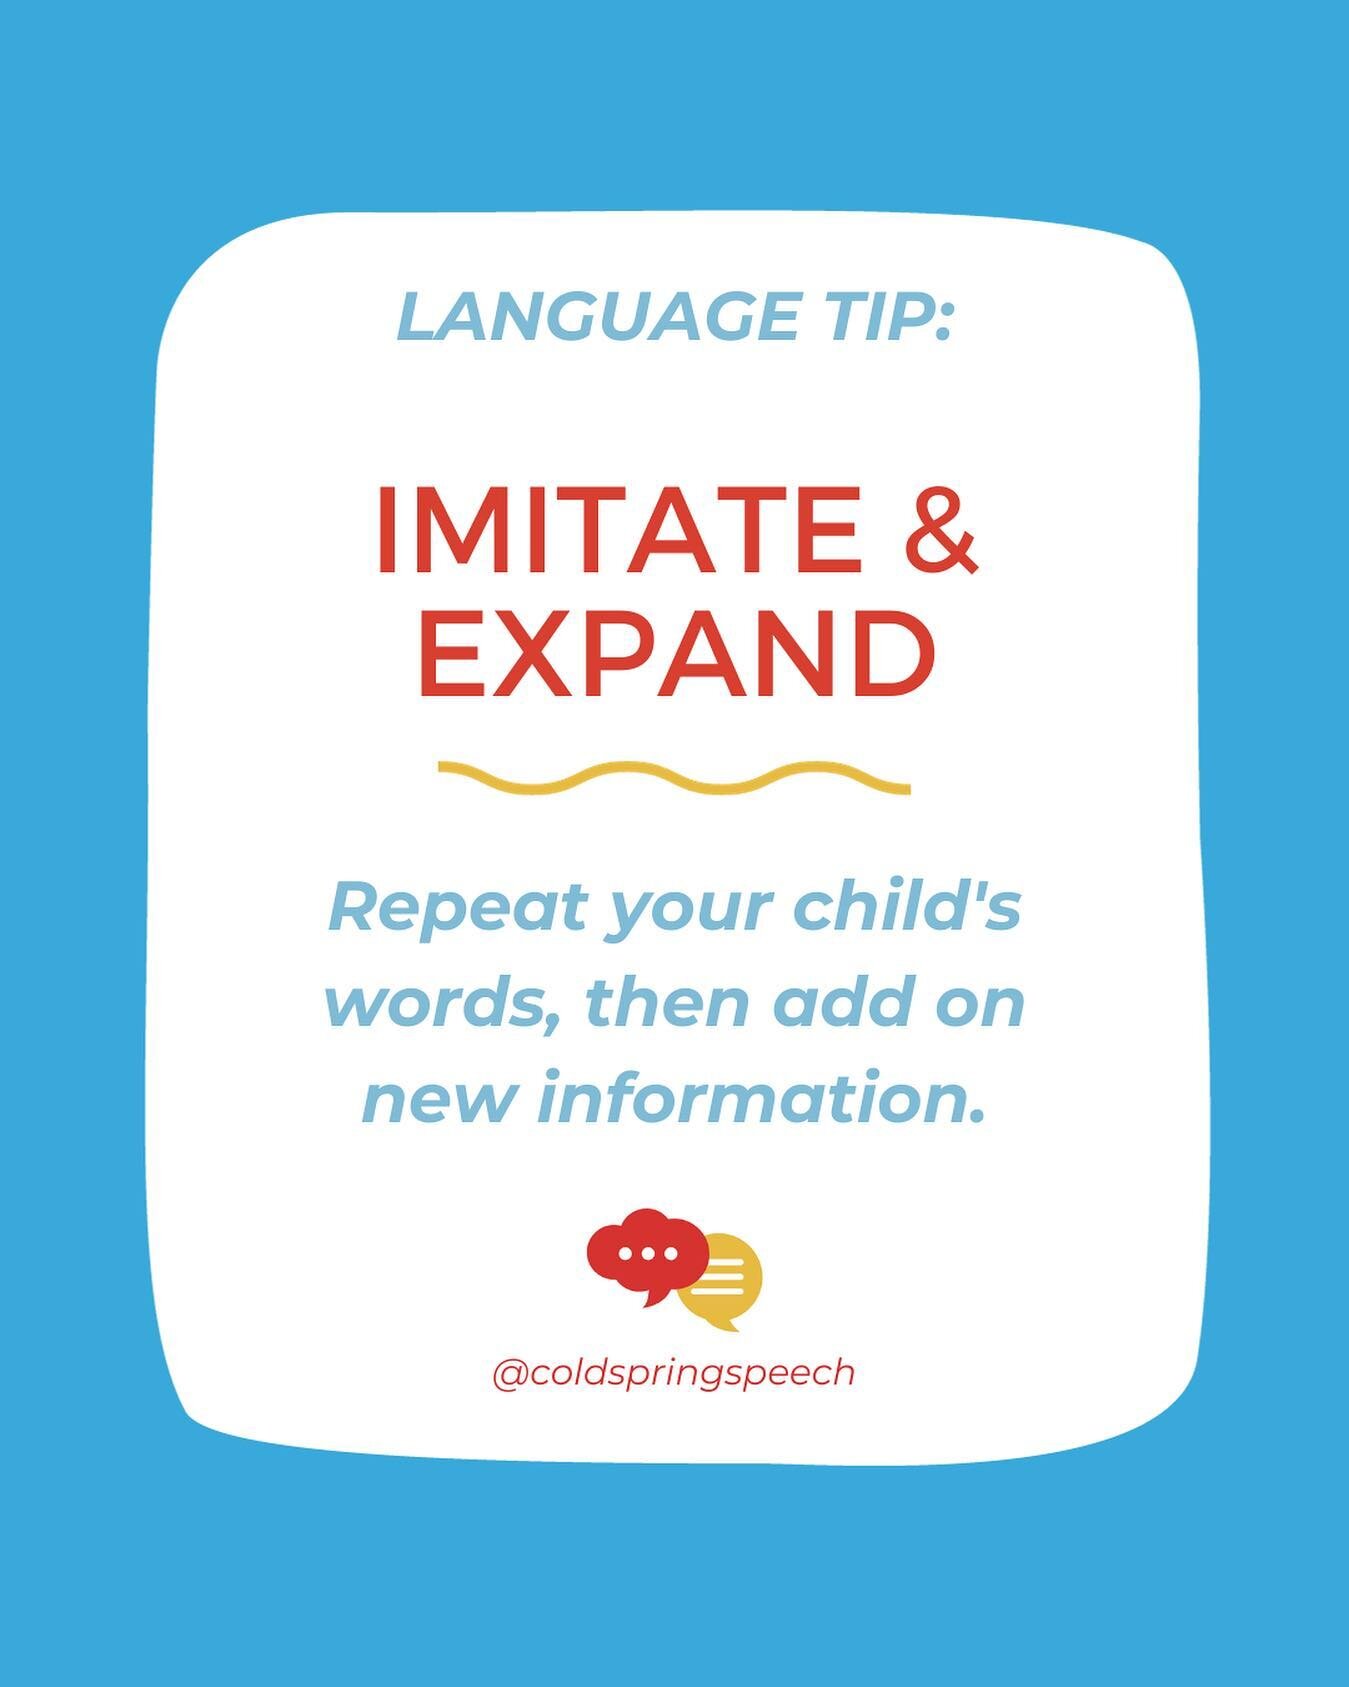 LANGUAGE TIP: IMITATE AND EXPAND

For this strategy, our goal is to affirm/repeat what they're already saying, and then give them new language models to learn from. Take a look at some examples of how to imitate and expand your child&rsquo;s words:

